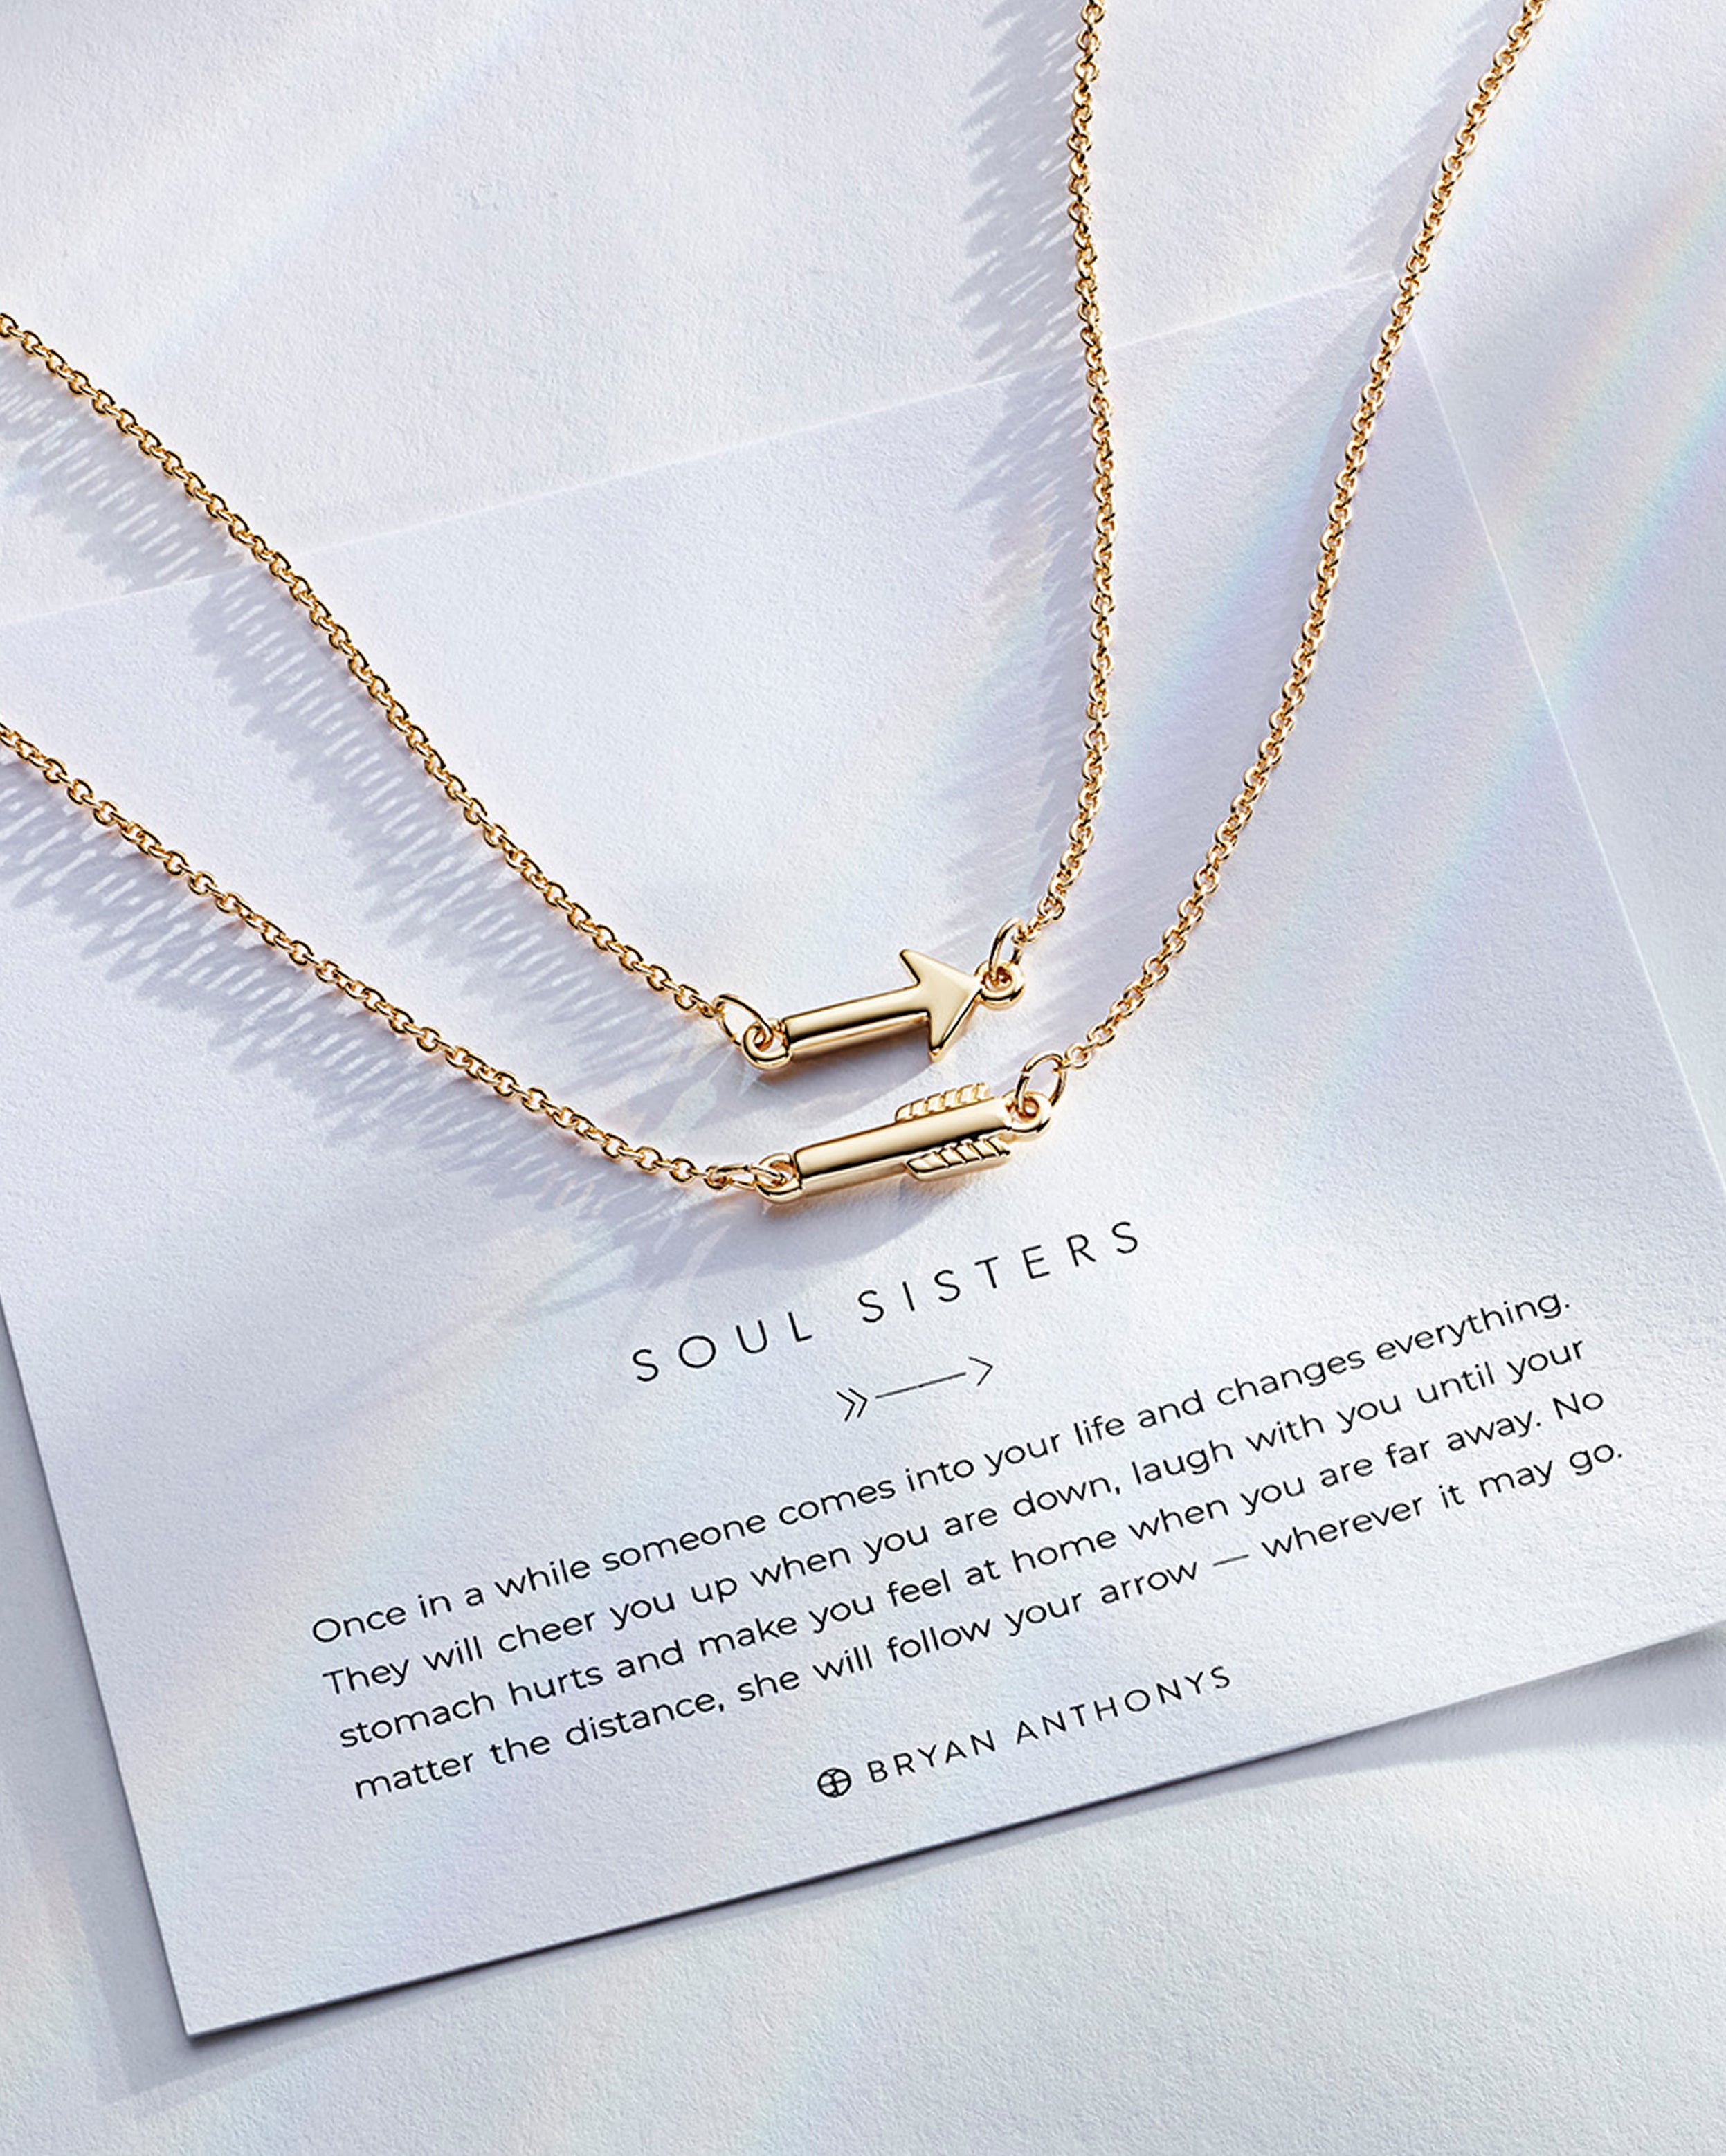 Bryan Anthonys Soul Sisters Friendship Arrows Necklace Set Gold with Meaning Card